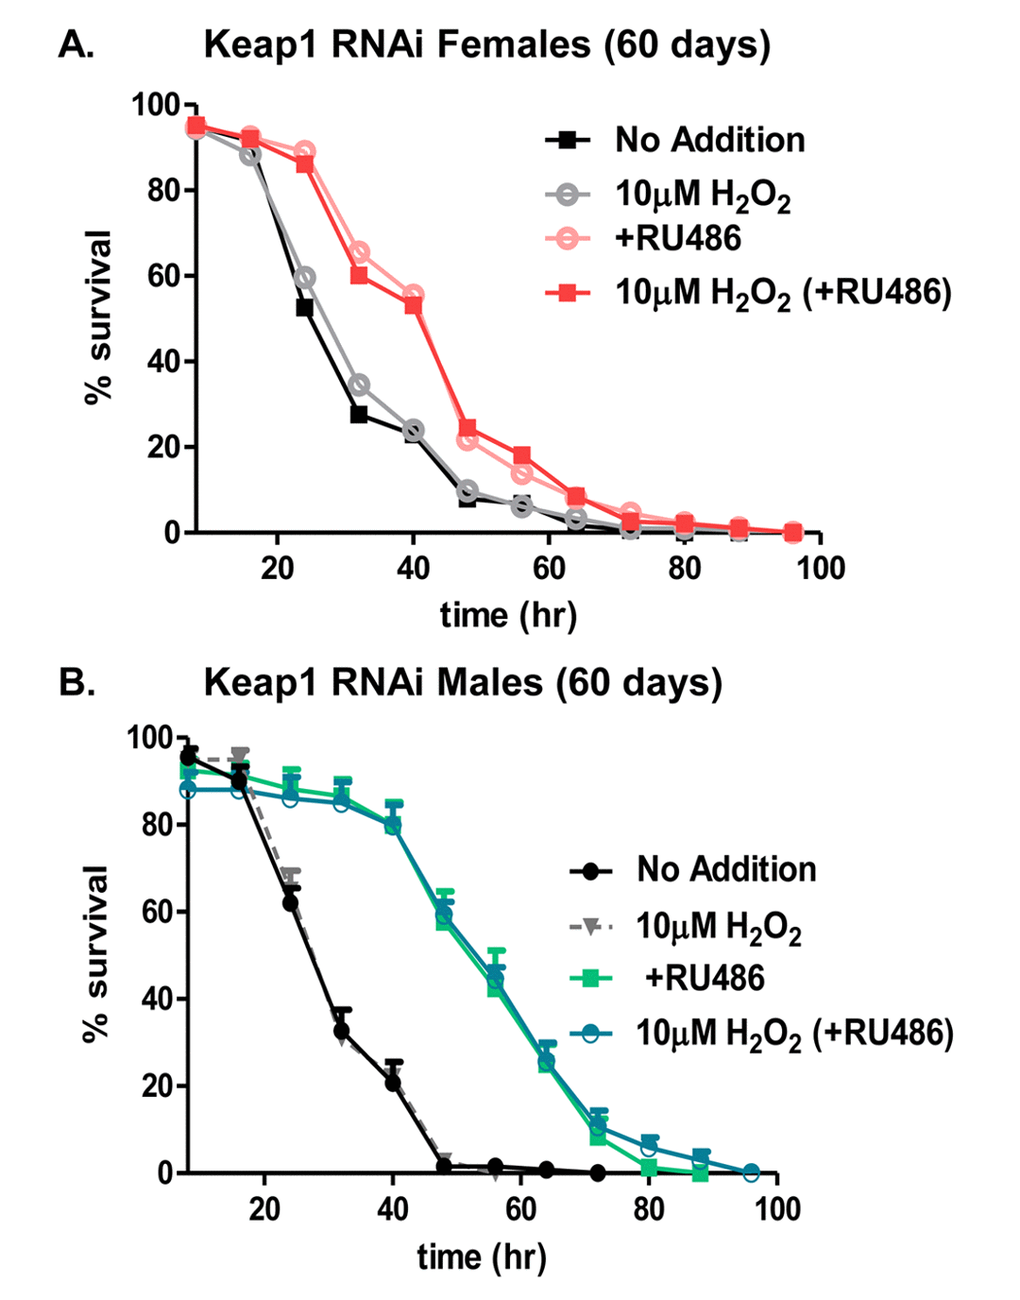 Hydrogen peroxide stress resistance improves with continual knockdown of Keap1 in aged (60 days) flies. In panels A and B, male and female progeny of the Actin-GS-255B strain crossed to Keap1 RNAi strain were collected and aged to 60 days. (A) Females raised in the absence of RU486 were either pretreated with 10µM H2O2 (gray line) “10µM H2O2” or not pre-treated with H2O2 (black line) “No Additions”. Females raised in the presence of RU486 were either pretreated with 10µM H2O2 (red line) “10µM H2O2 (+RU486)” or not pretreated with H2O2 (pink line) “+RU486”. (B) Males raised in the absence of RU486 were either pretreated with 10µM H2O2 (gray line) “10µM H2O2” or not pre-treated with H2O2 (black line) “No Additions”. Males raised in the presence of RU486 were either pretreated with 10µM H2O2 (blue line) “10µM H2O2 (+RU486)” or not pretreated with H2O2 (green line) “+RU486”. Statistical difference in survival (p Supplementary Table S4.